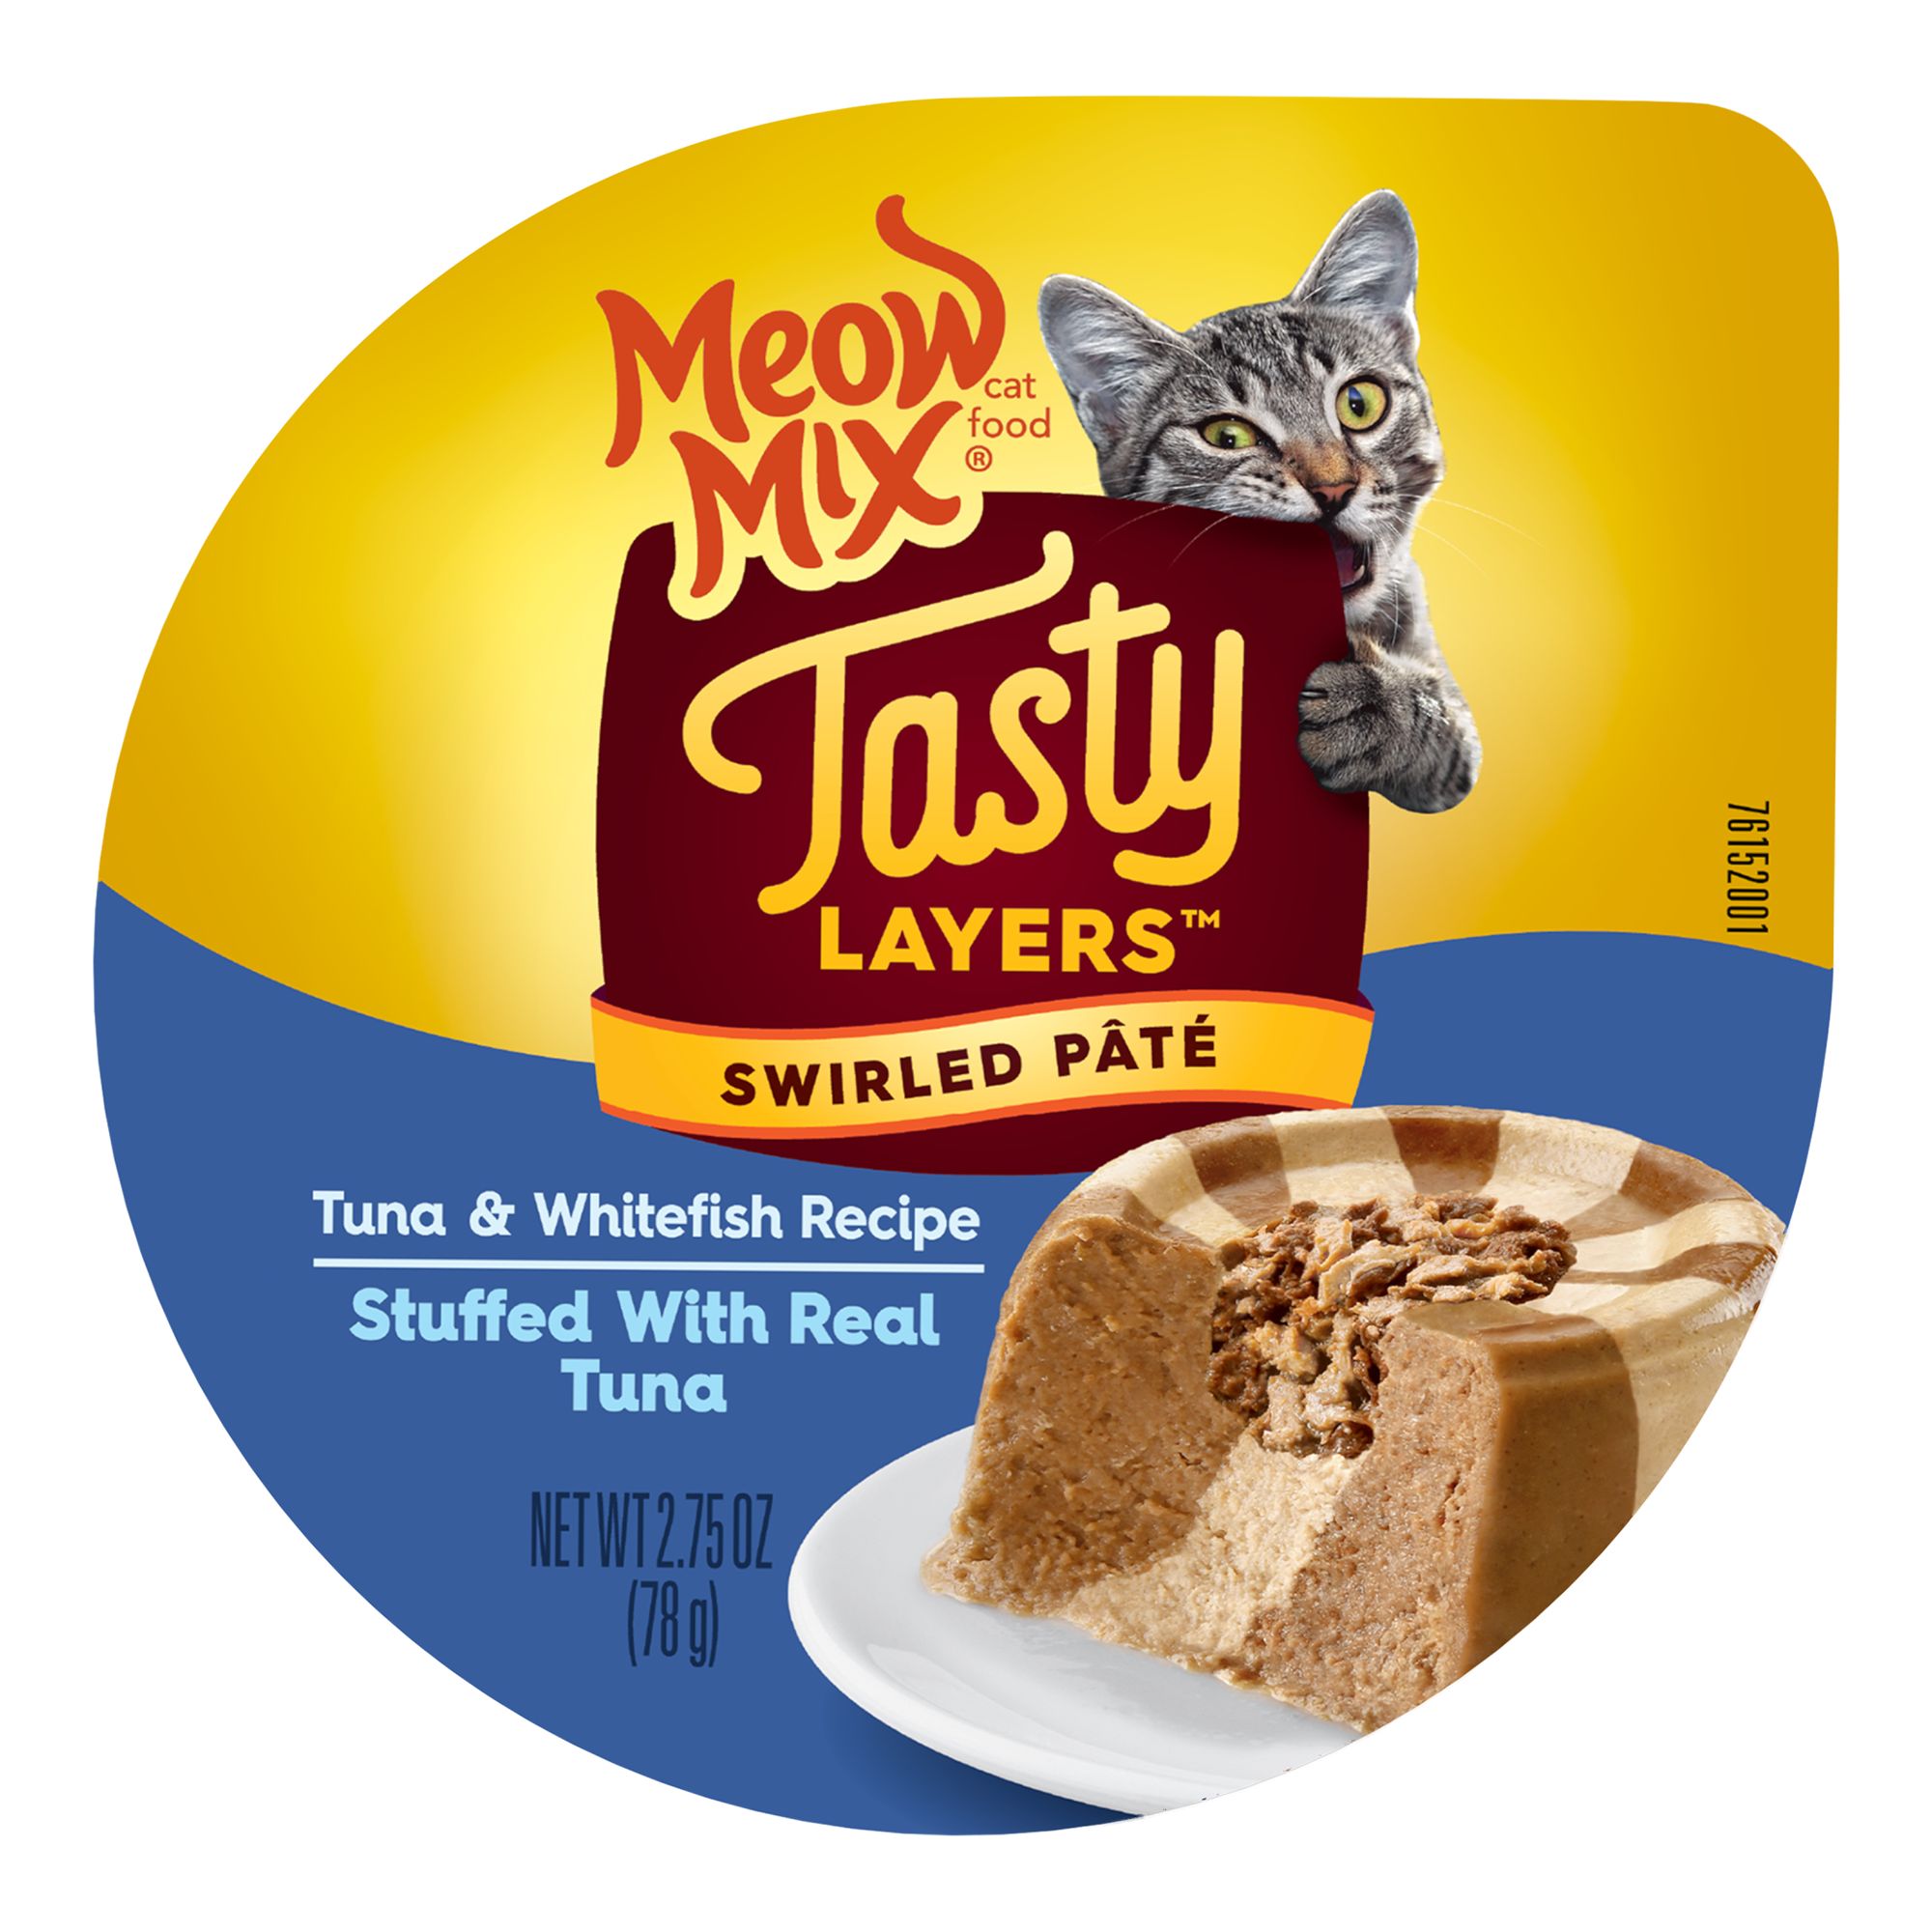 Meow Mix Tasty Layers Wet Cat Food Adult - Tuna, Whitefish